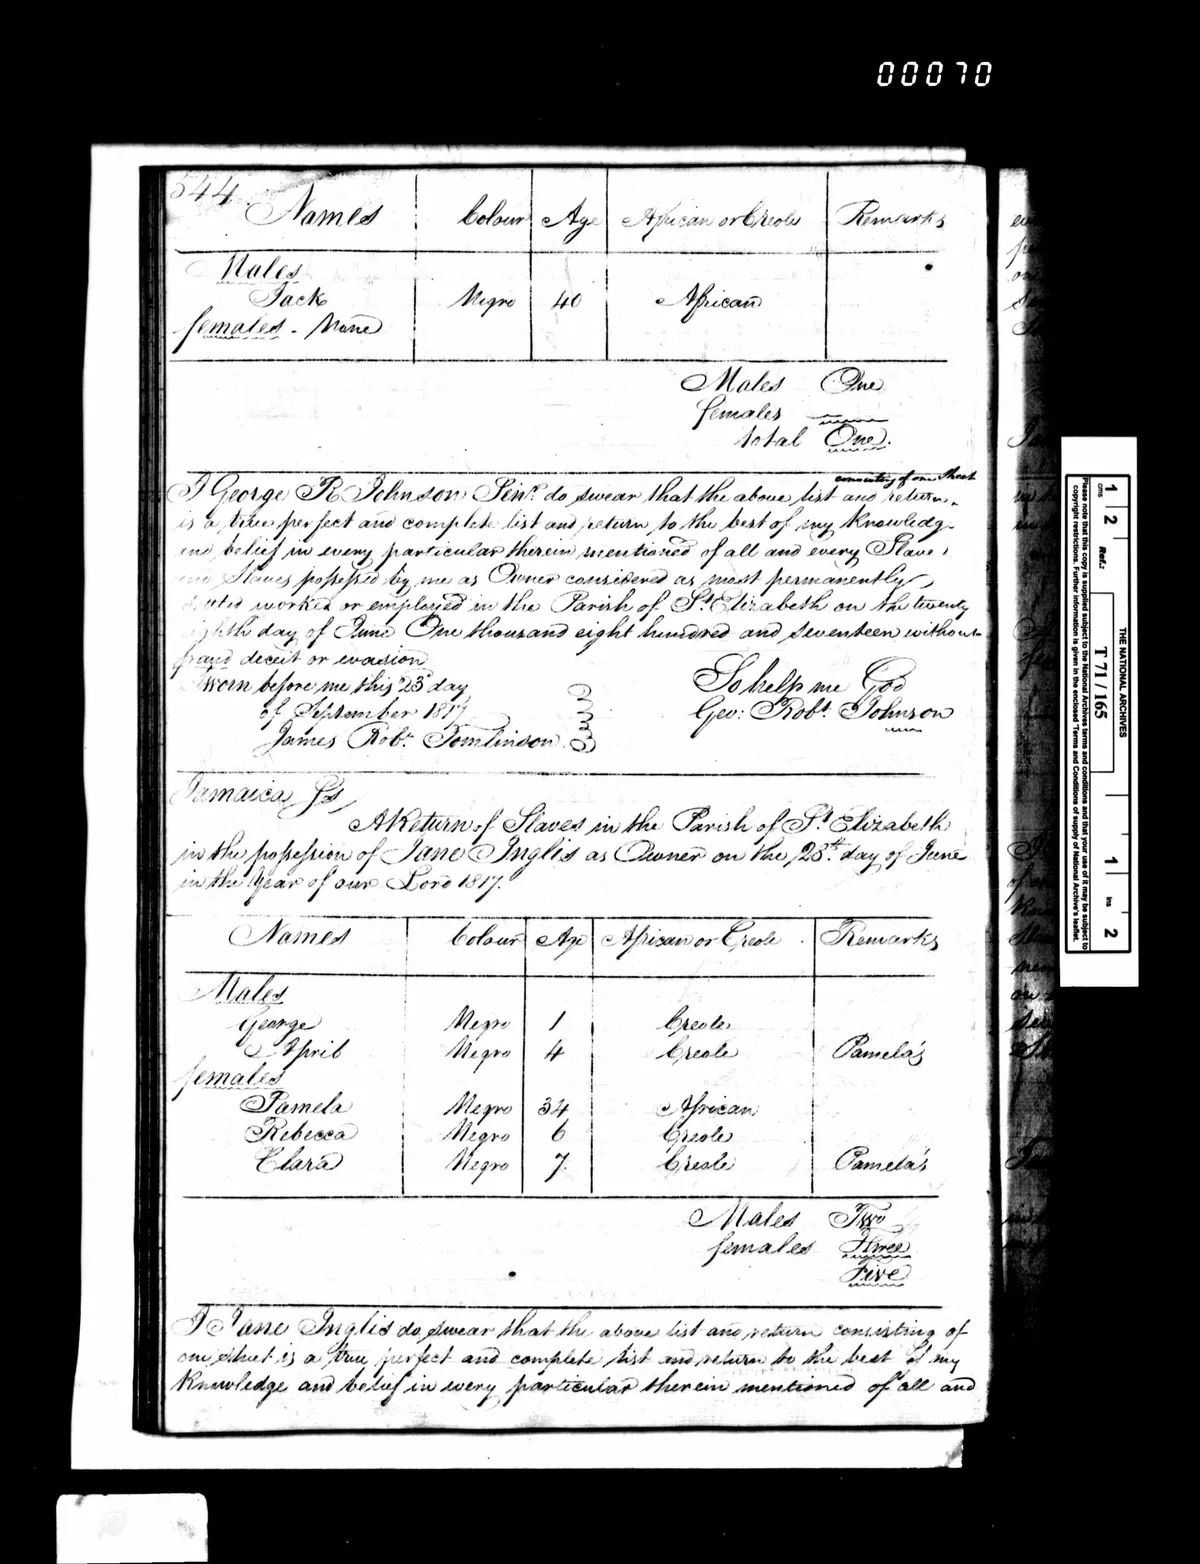  This Caribbean slave record is among the free records on Ancestry